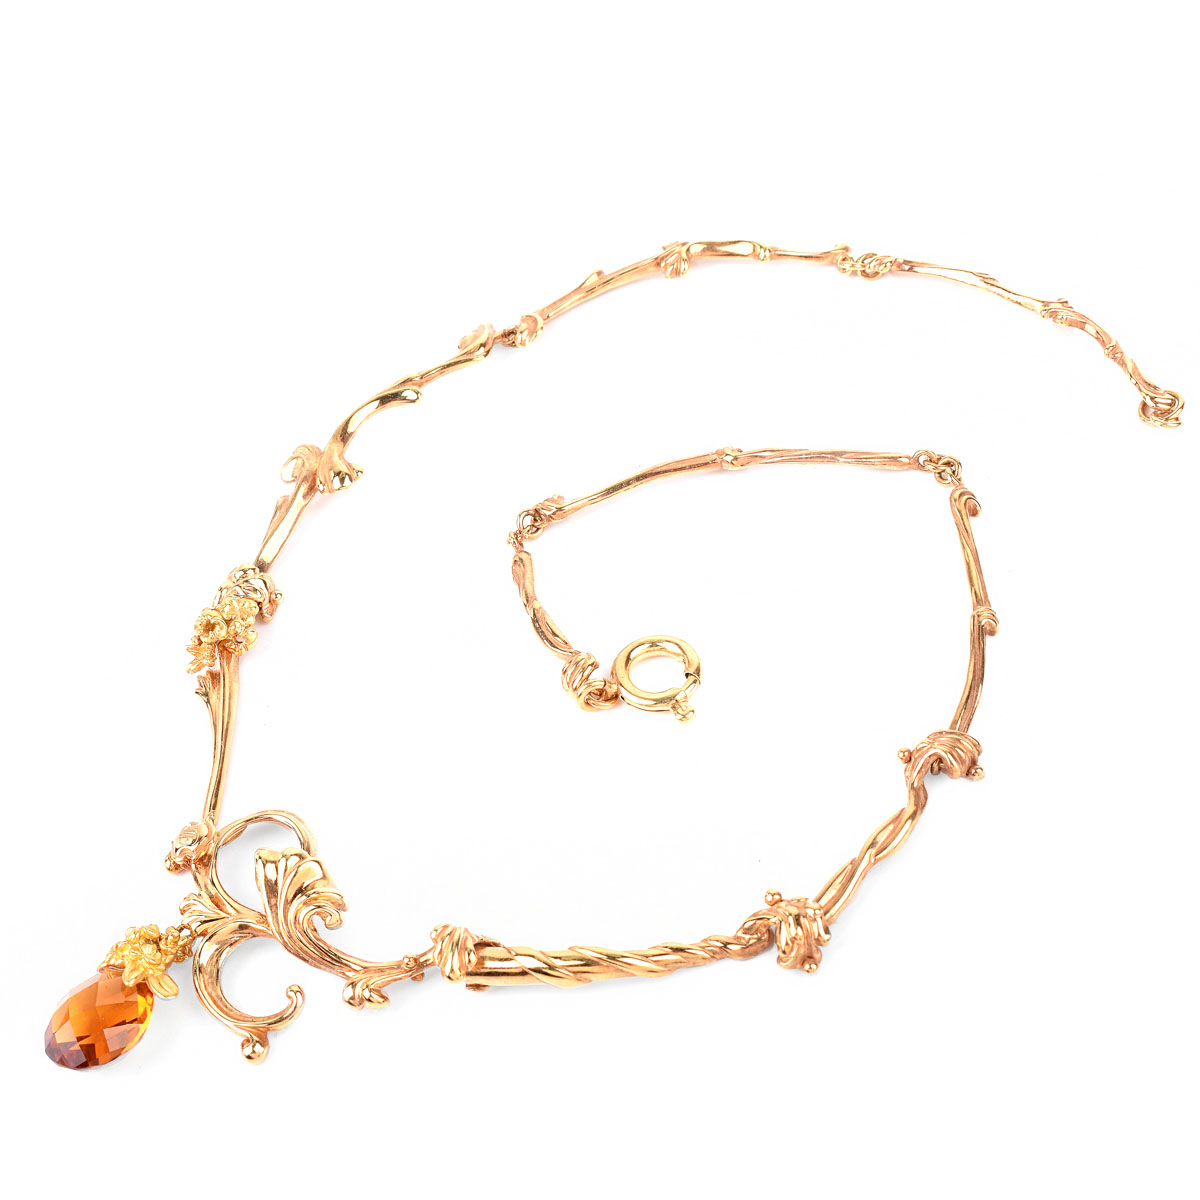 Antique Italian 14 Karat Yellow Gold and Briolette Cut Citrine Pendant Necklace. Stamped Italy 14K, maker's mark "B".